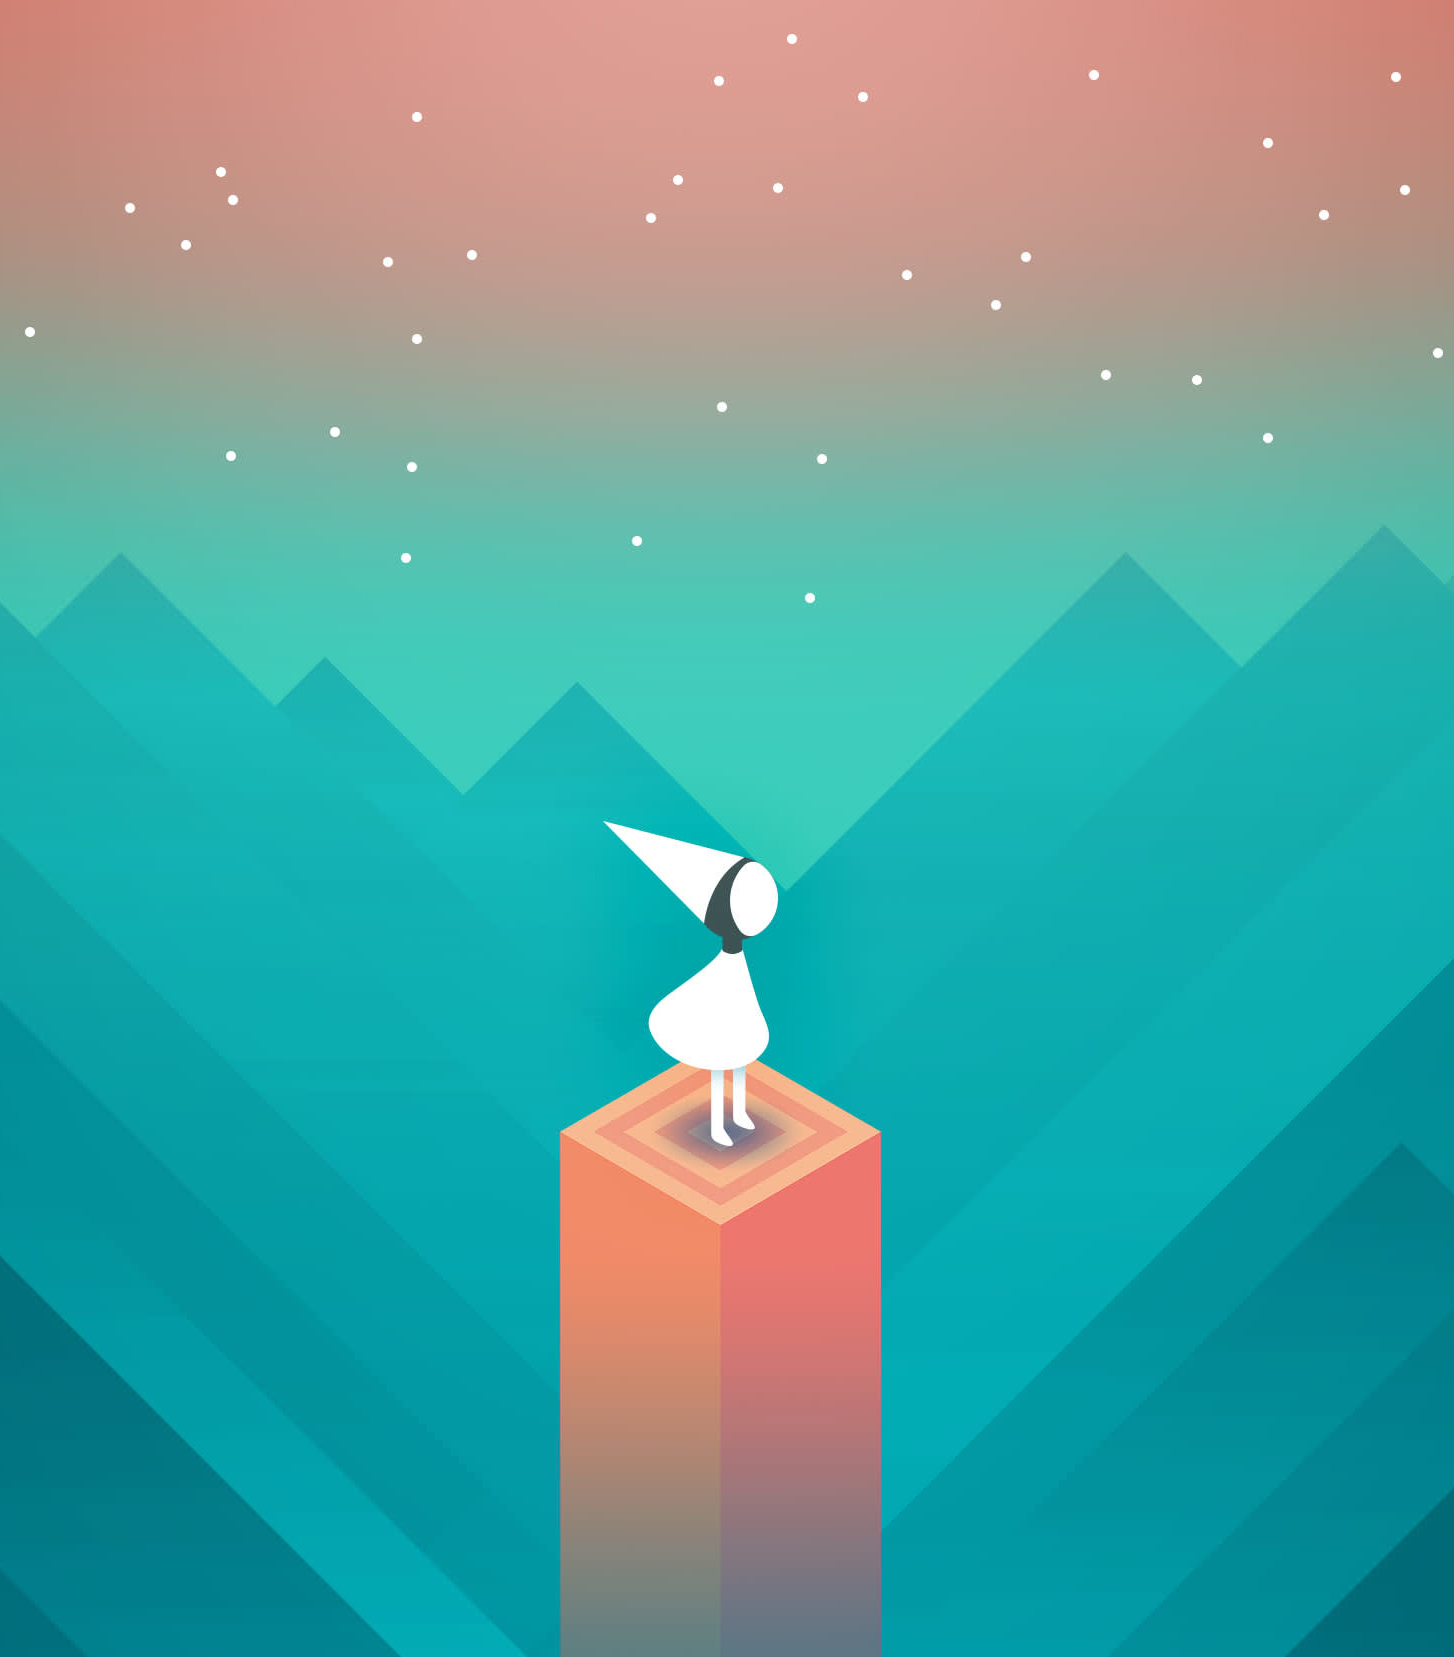 Monument Valley video game